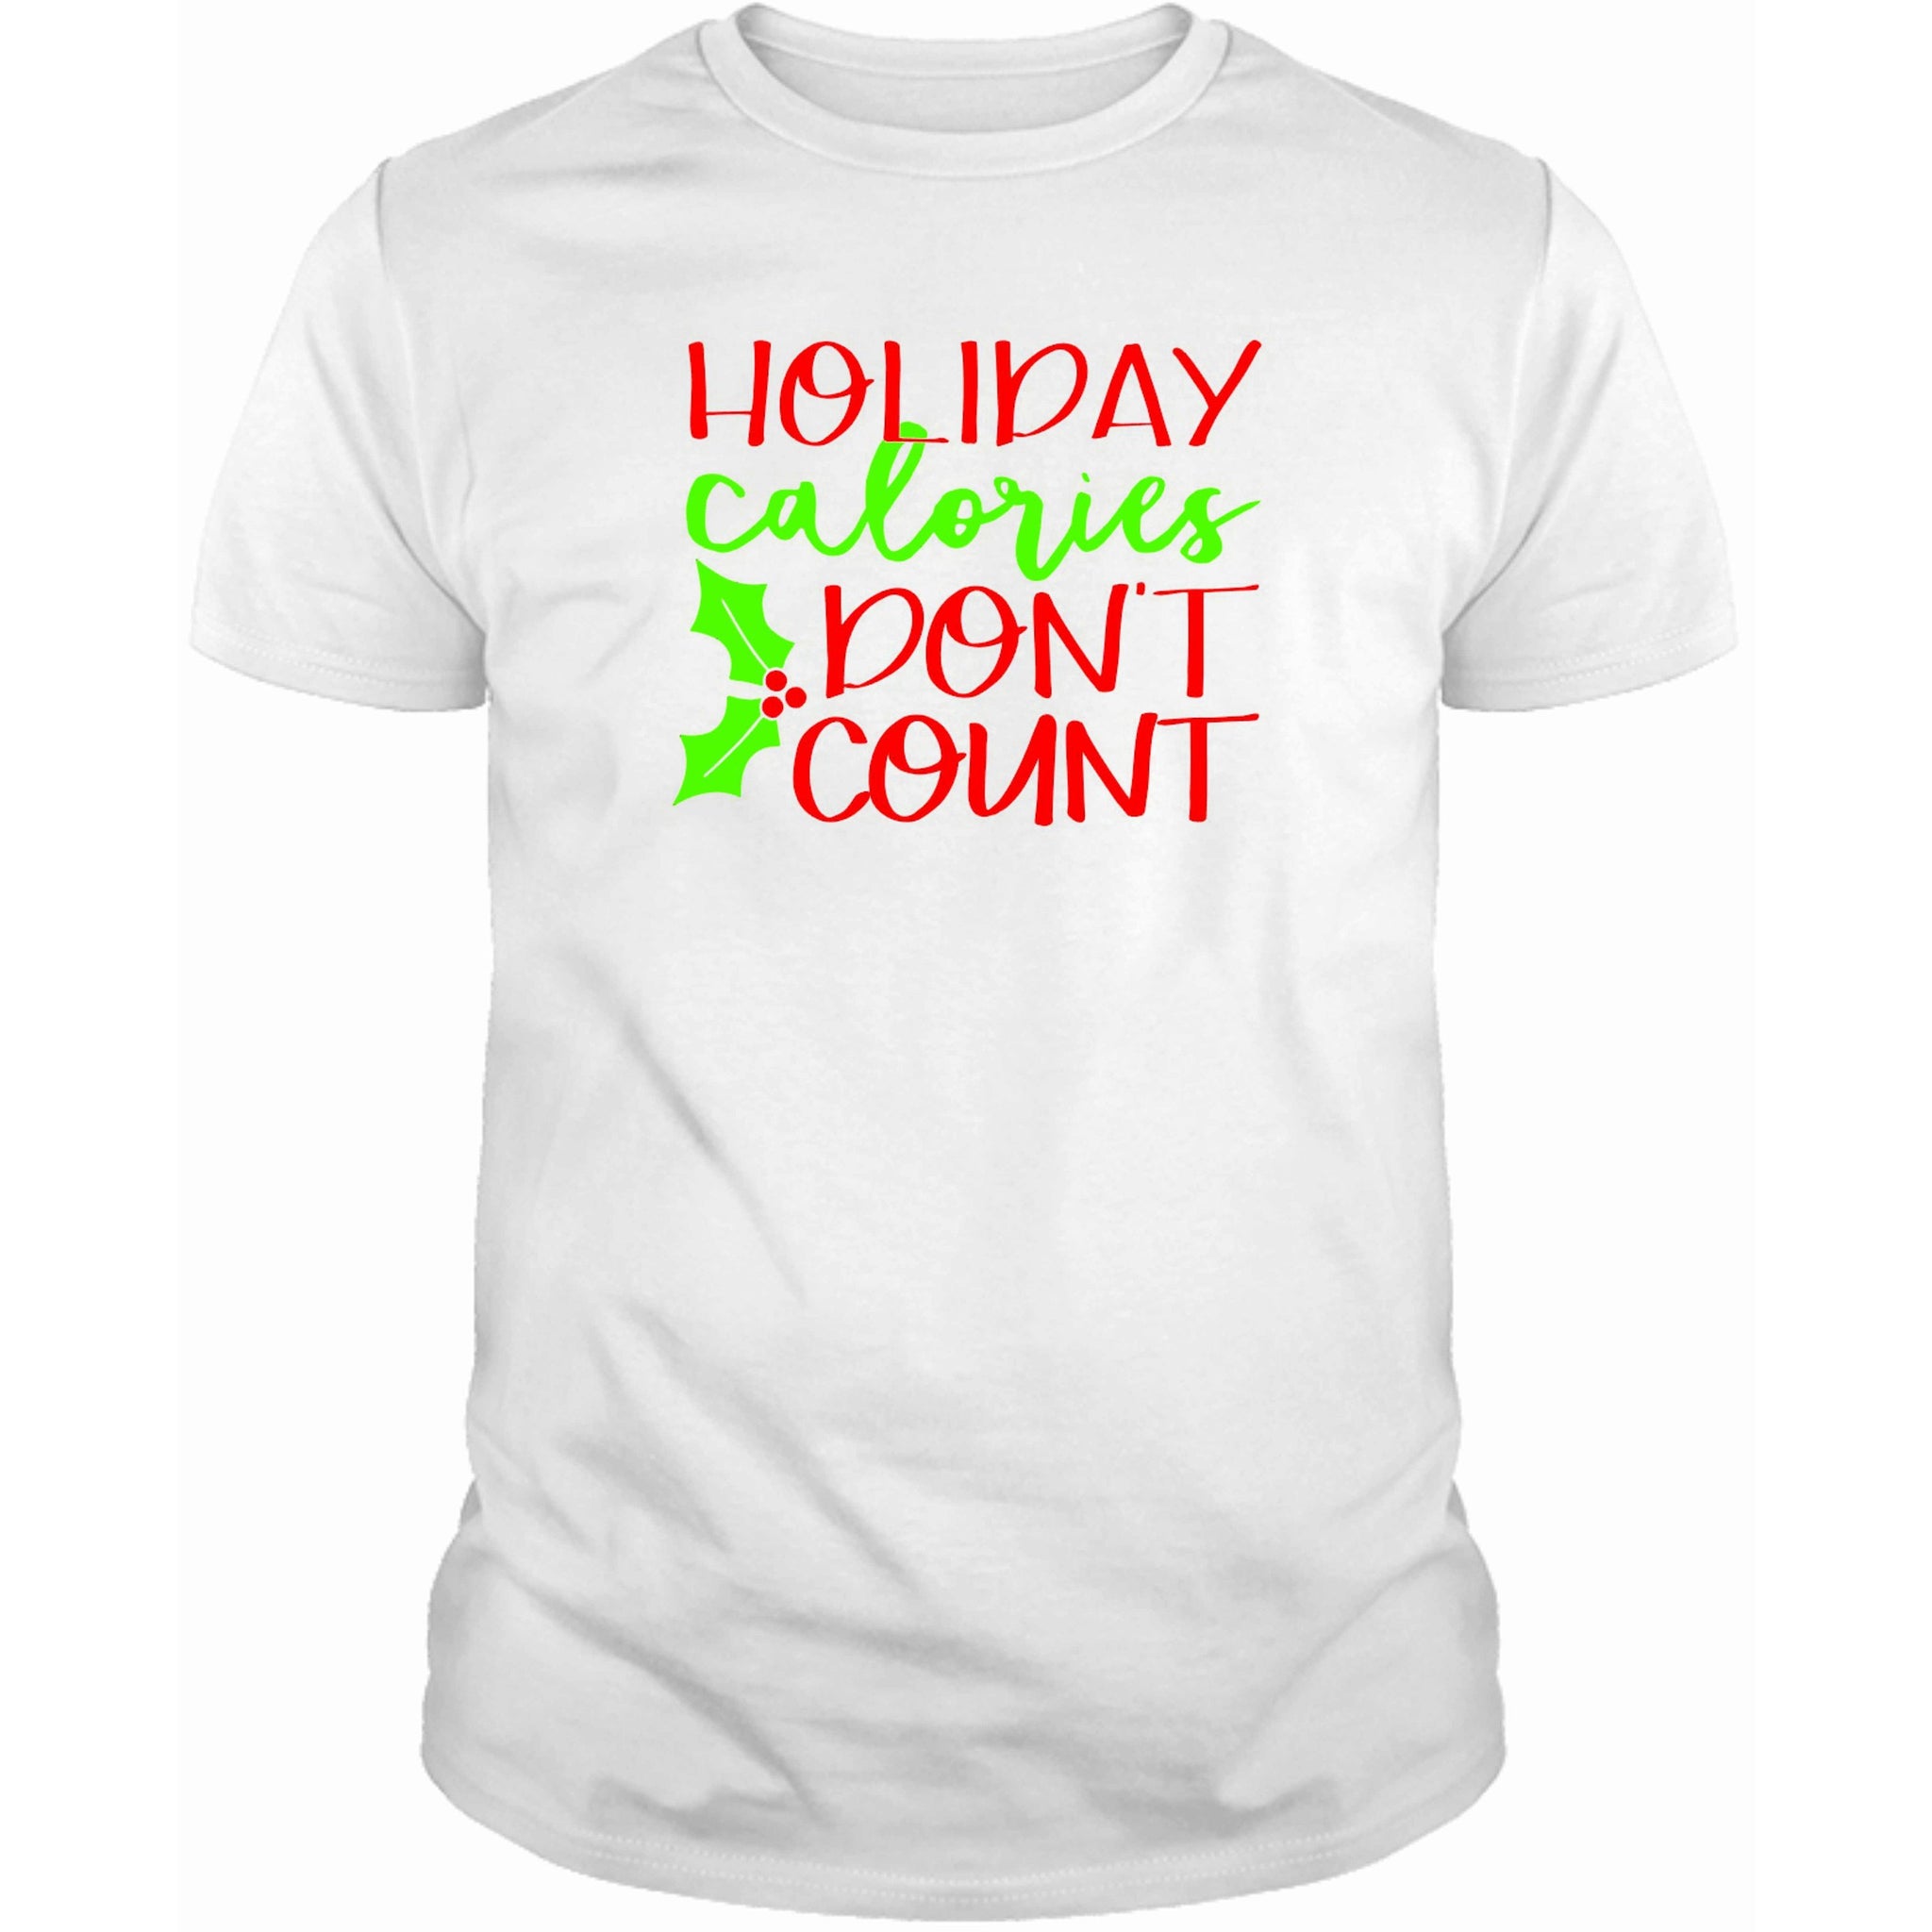 Holiday Calories Don't Count T-Shirt